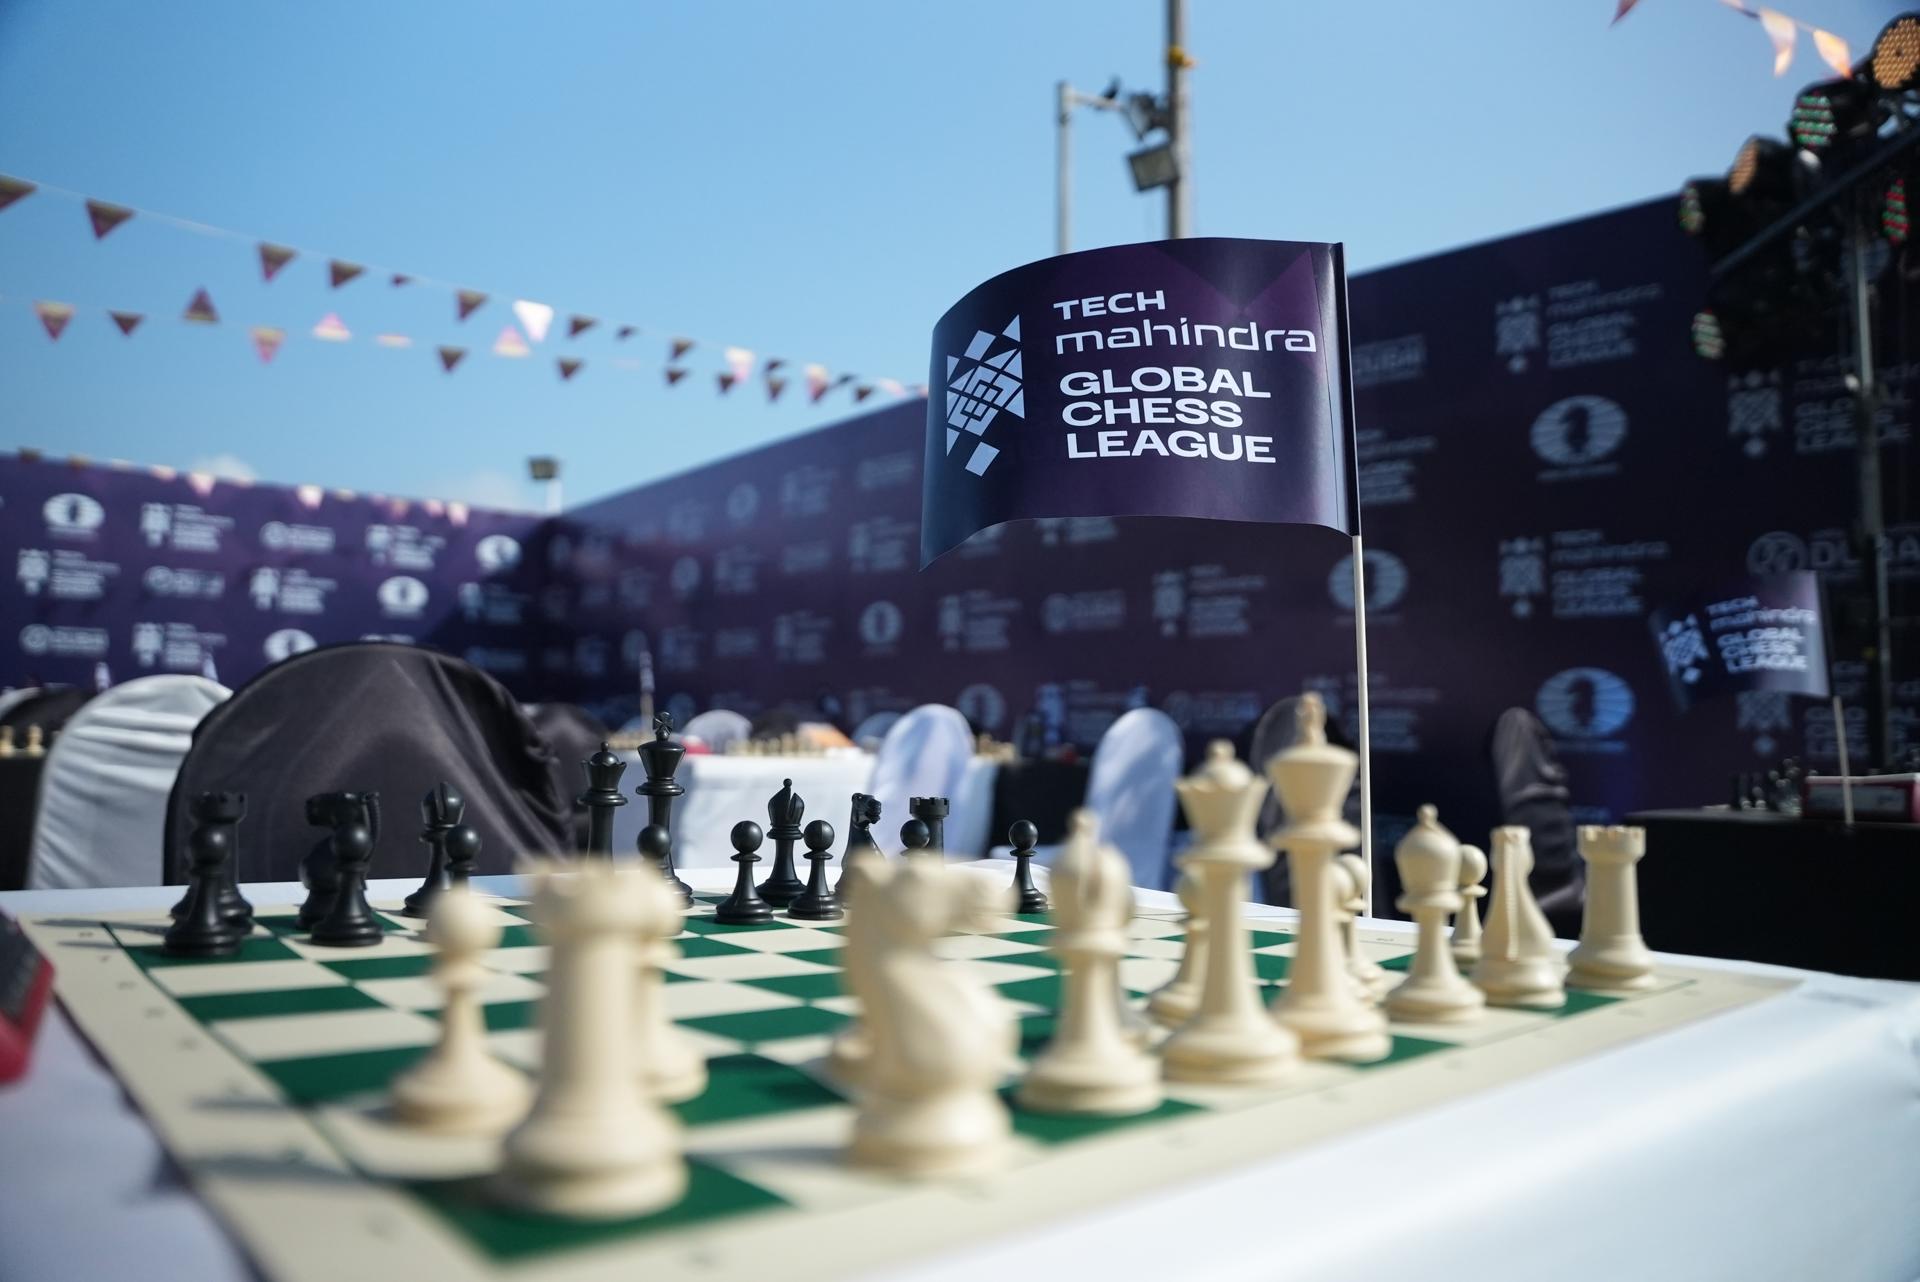 File photo of a Global Chess League (GCL) chess match in a file photo. EFE/Chess Global League